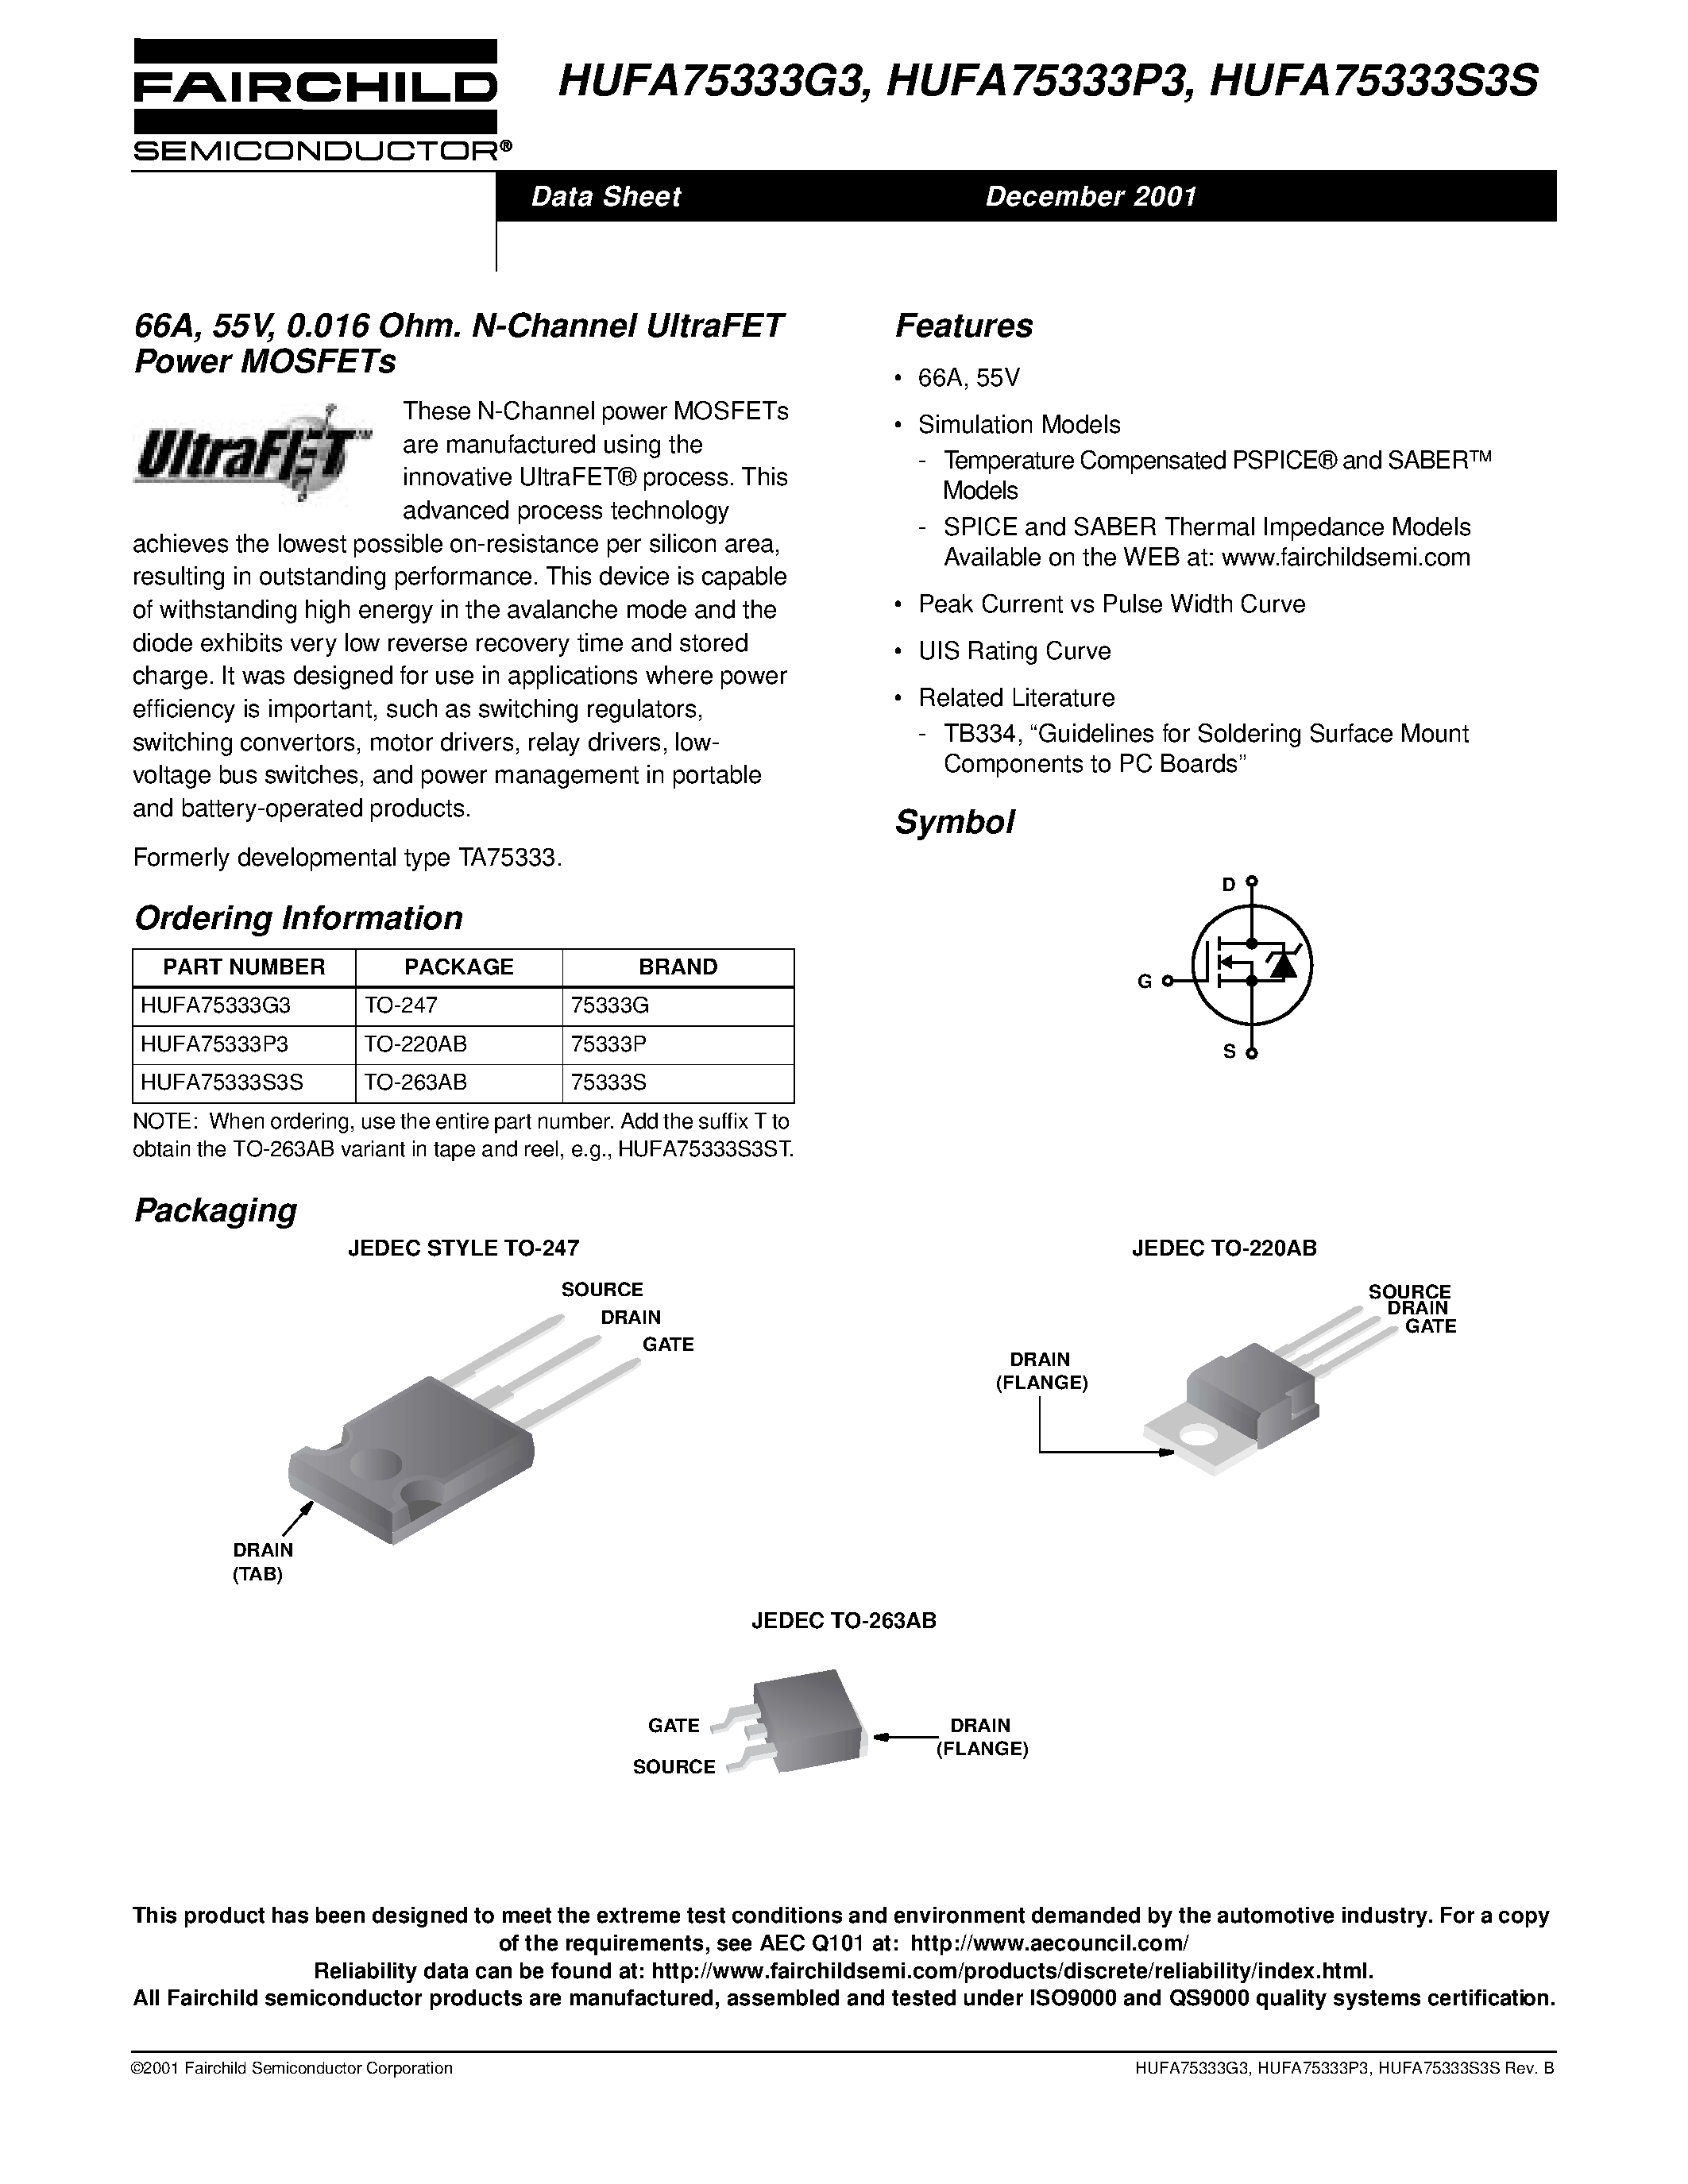 Даташит HUFA75337P3 - 75A/ 55V/ 0.014 Ohm/ N-Channel UltraFET Power MOSFETs страница 1